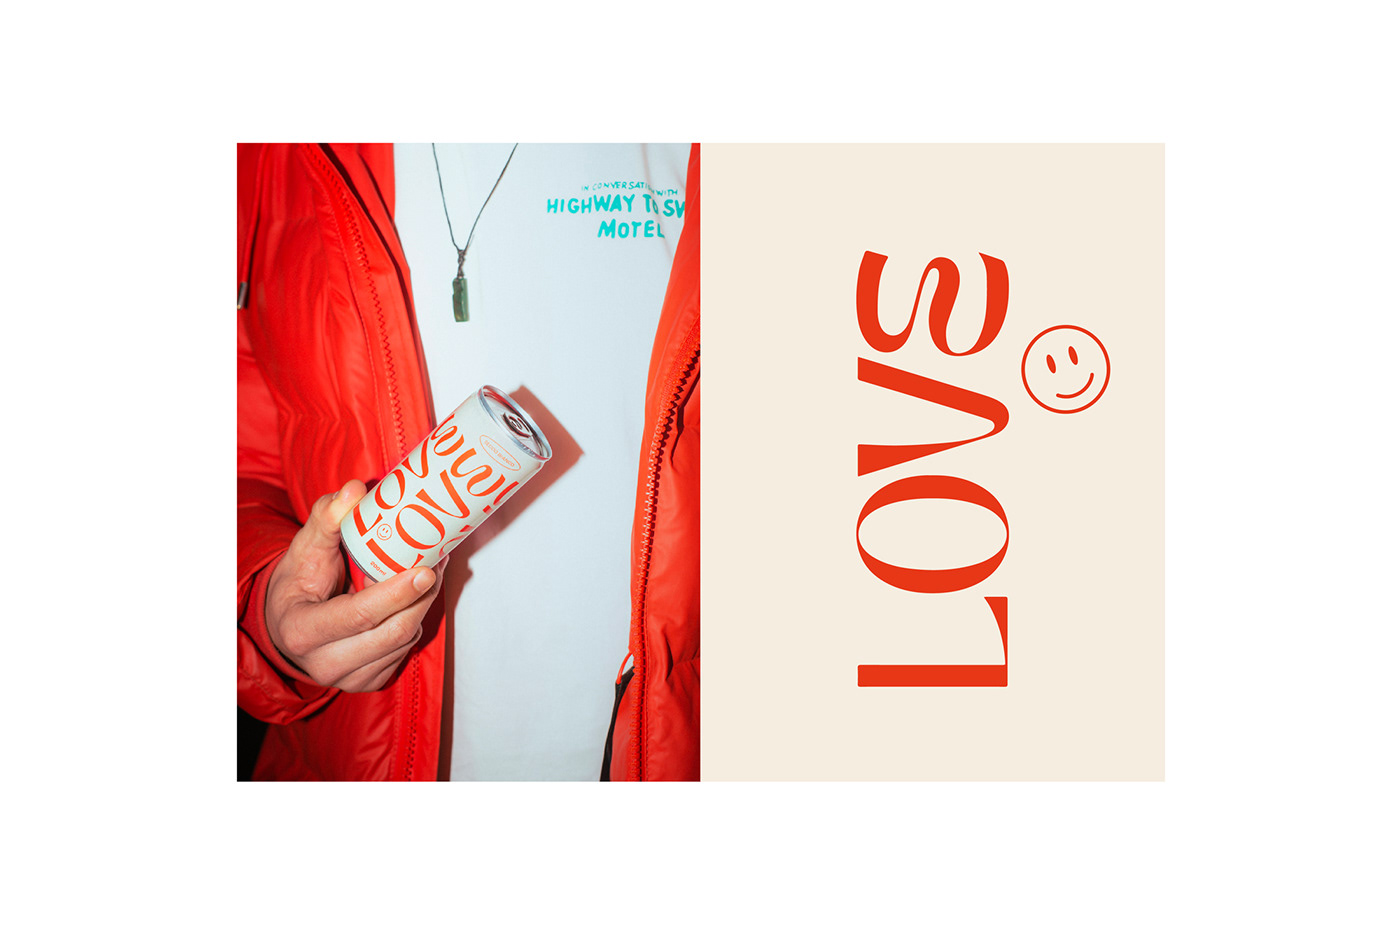 Campaign for LOVE SECCO Drink, Packaging and Branding